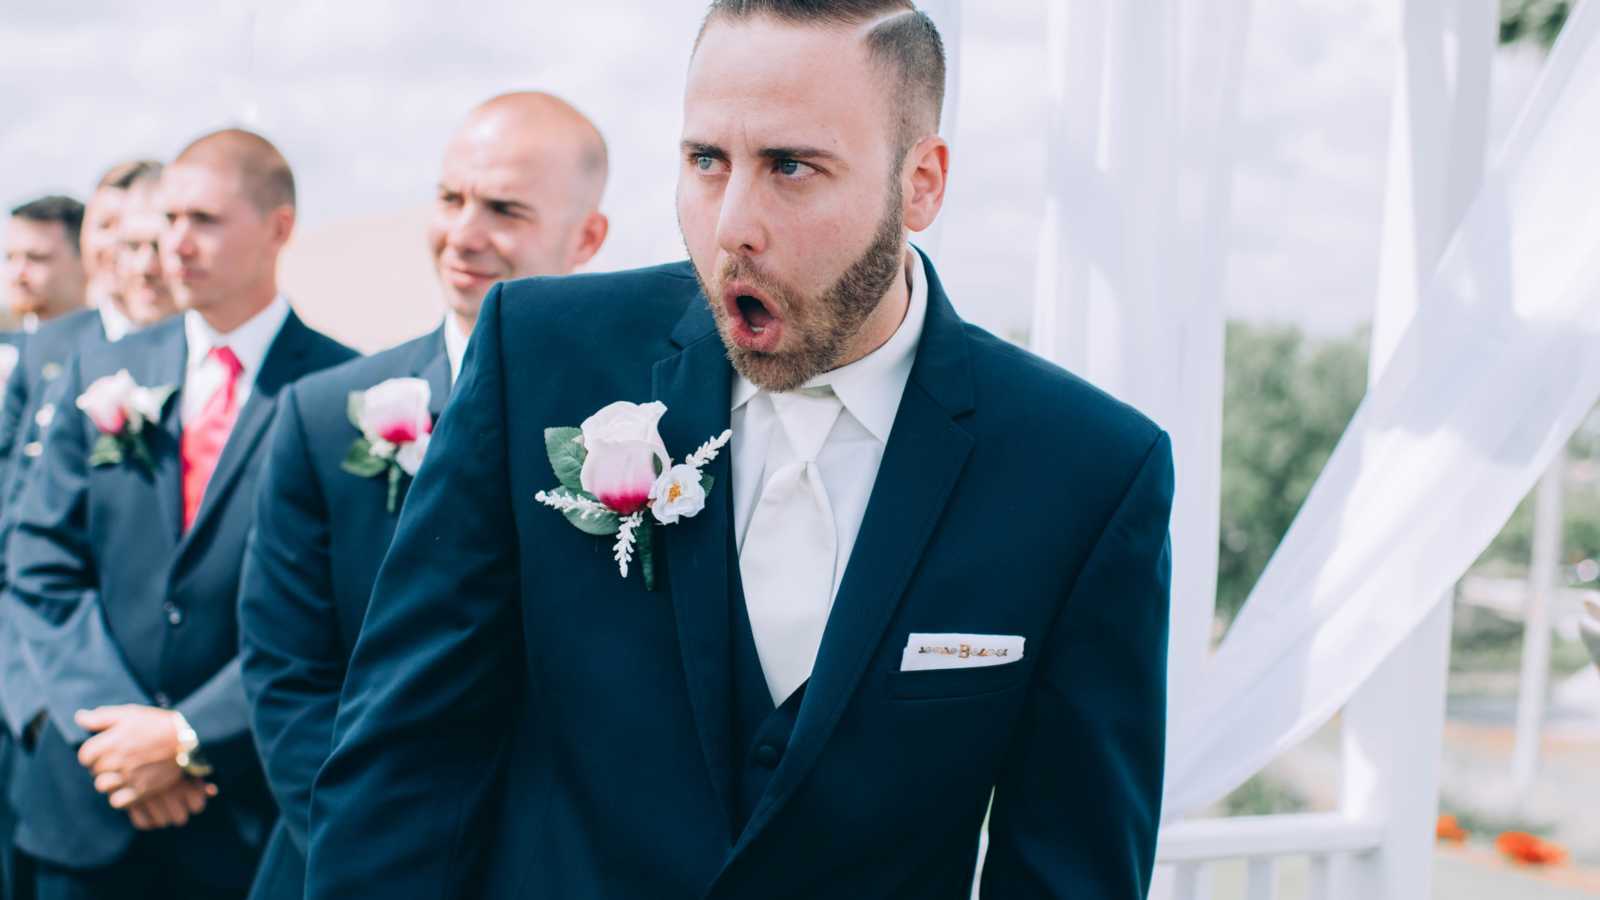 groom at wedding with jaw dropped